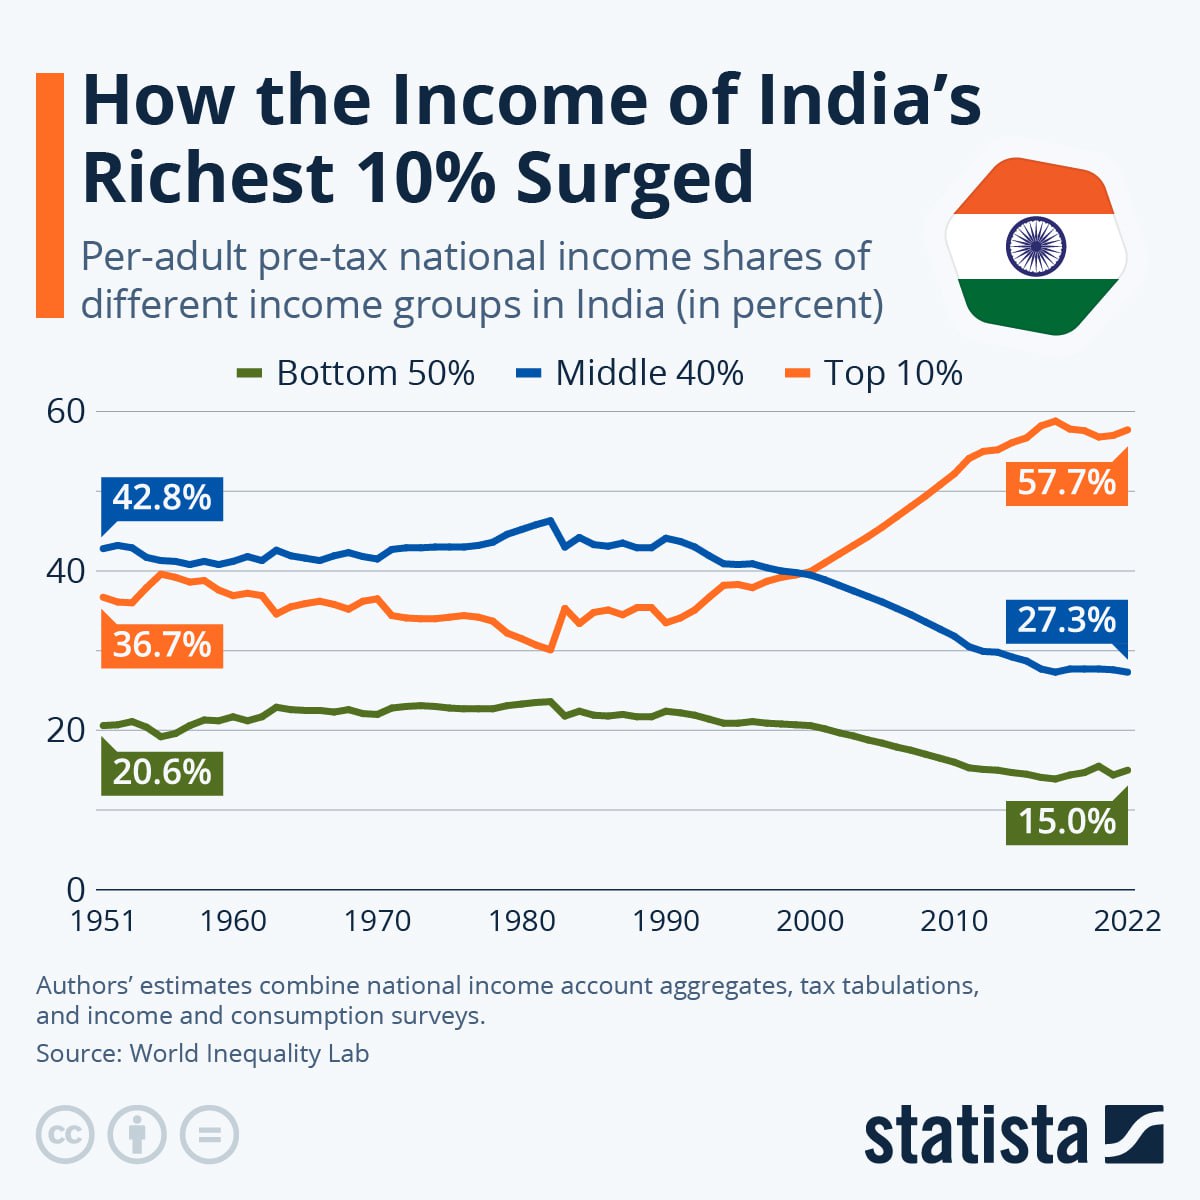 The gap between the rich and poor is getting bigger in #India. To be fair, this is also relevant in the UK, the US, and many other countries. #WealthGap